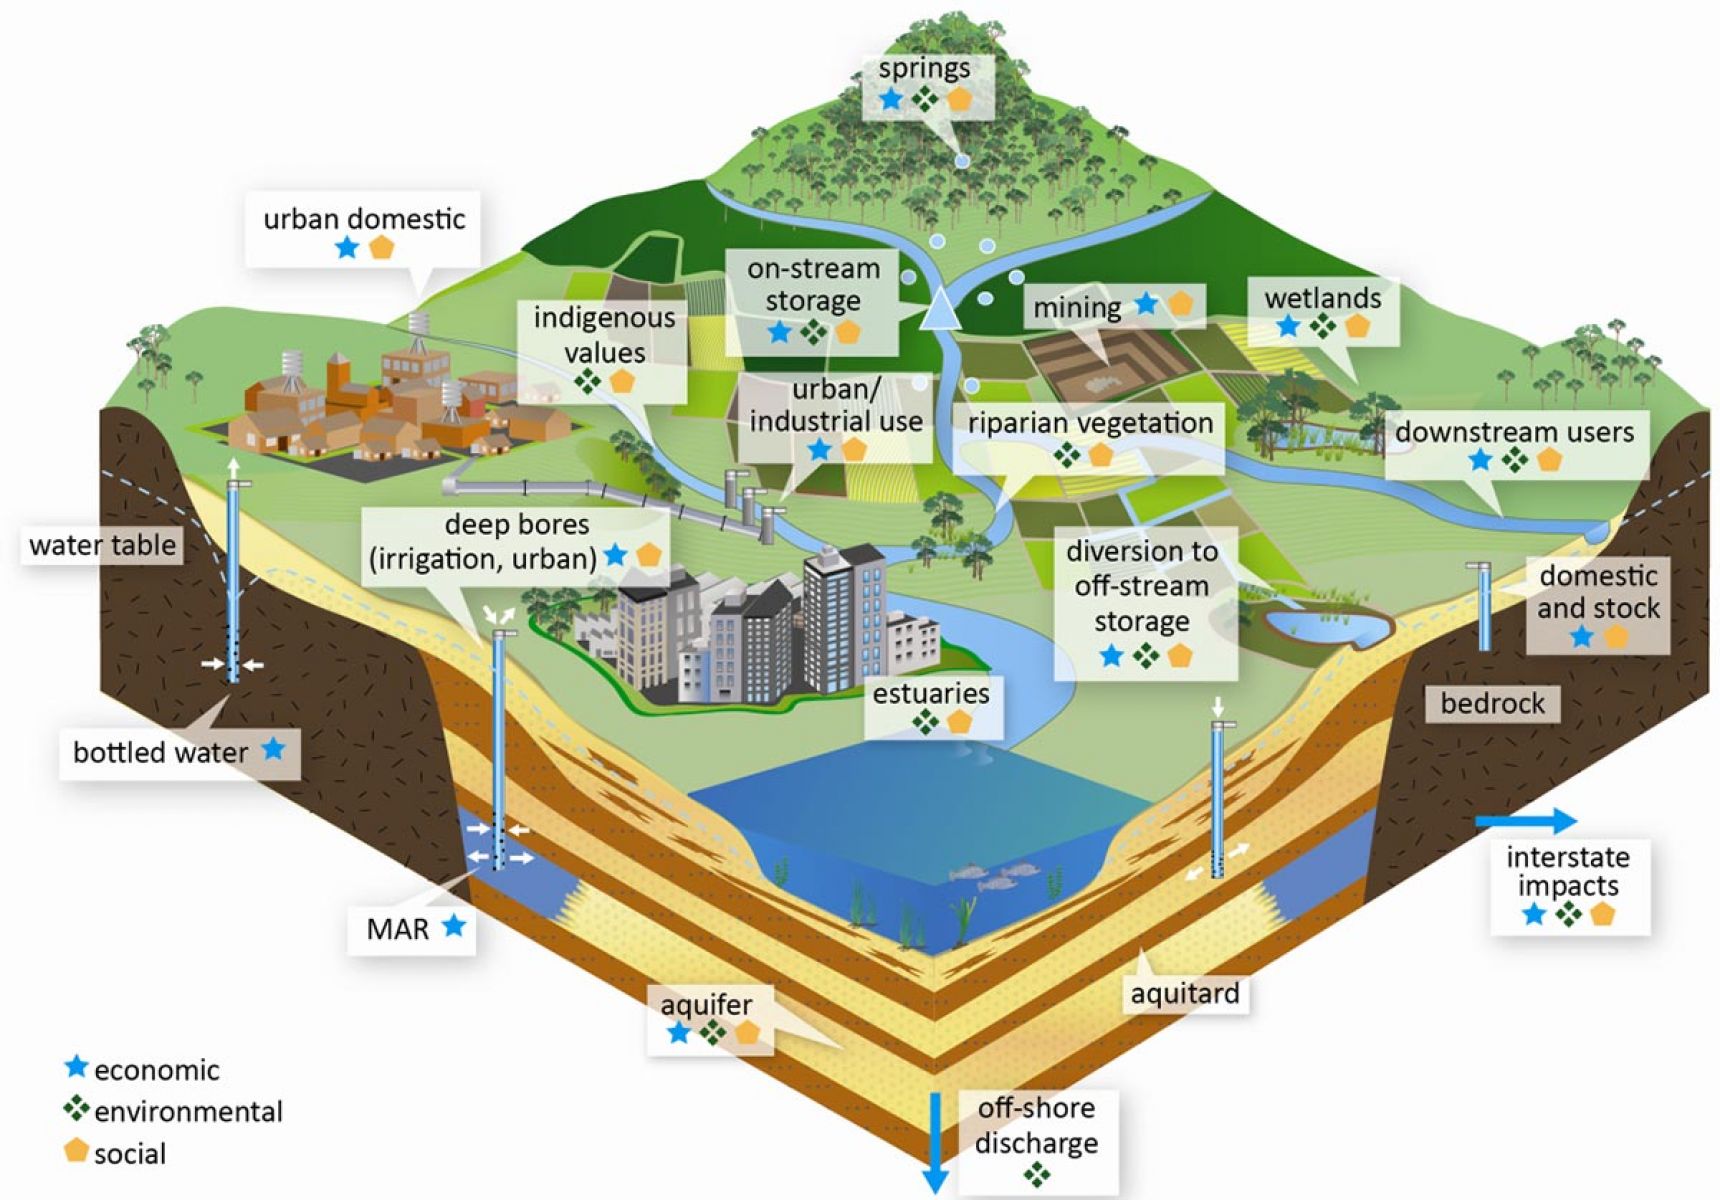 3D model showing all of the economic, environmental and social uses and connections to groundwater across the lands